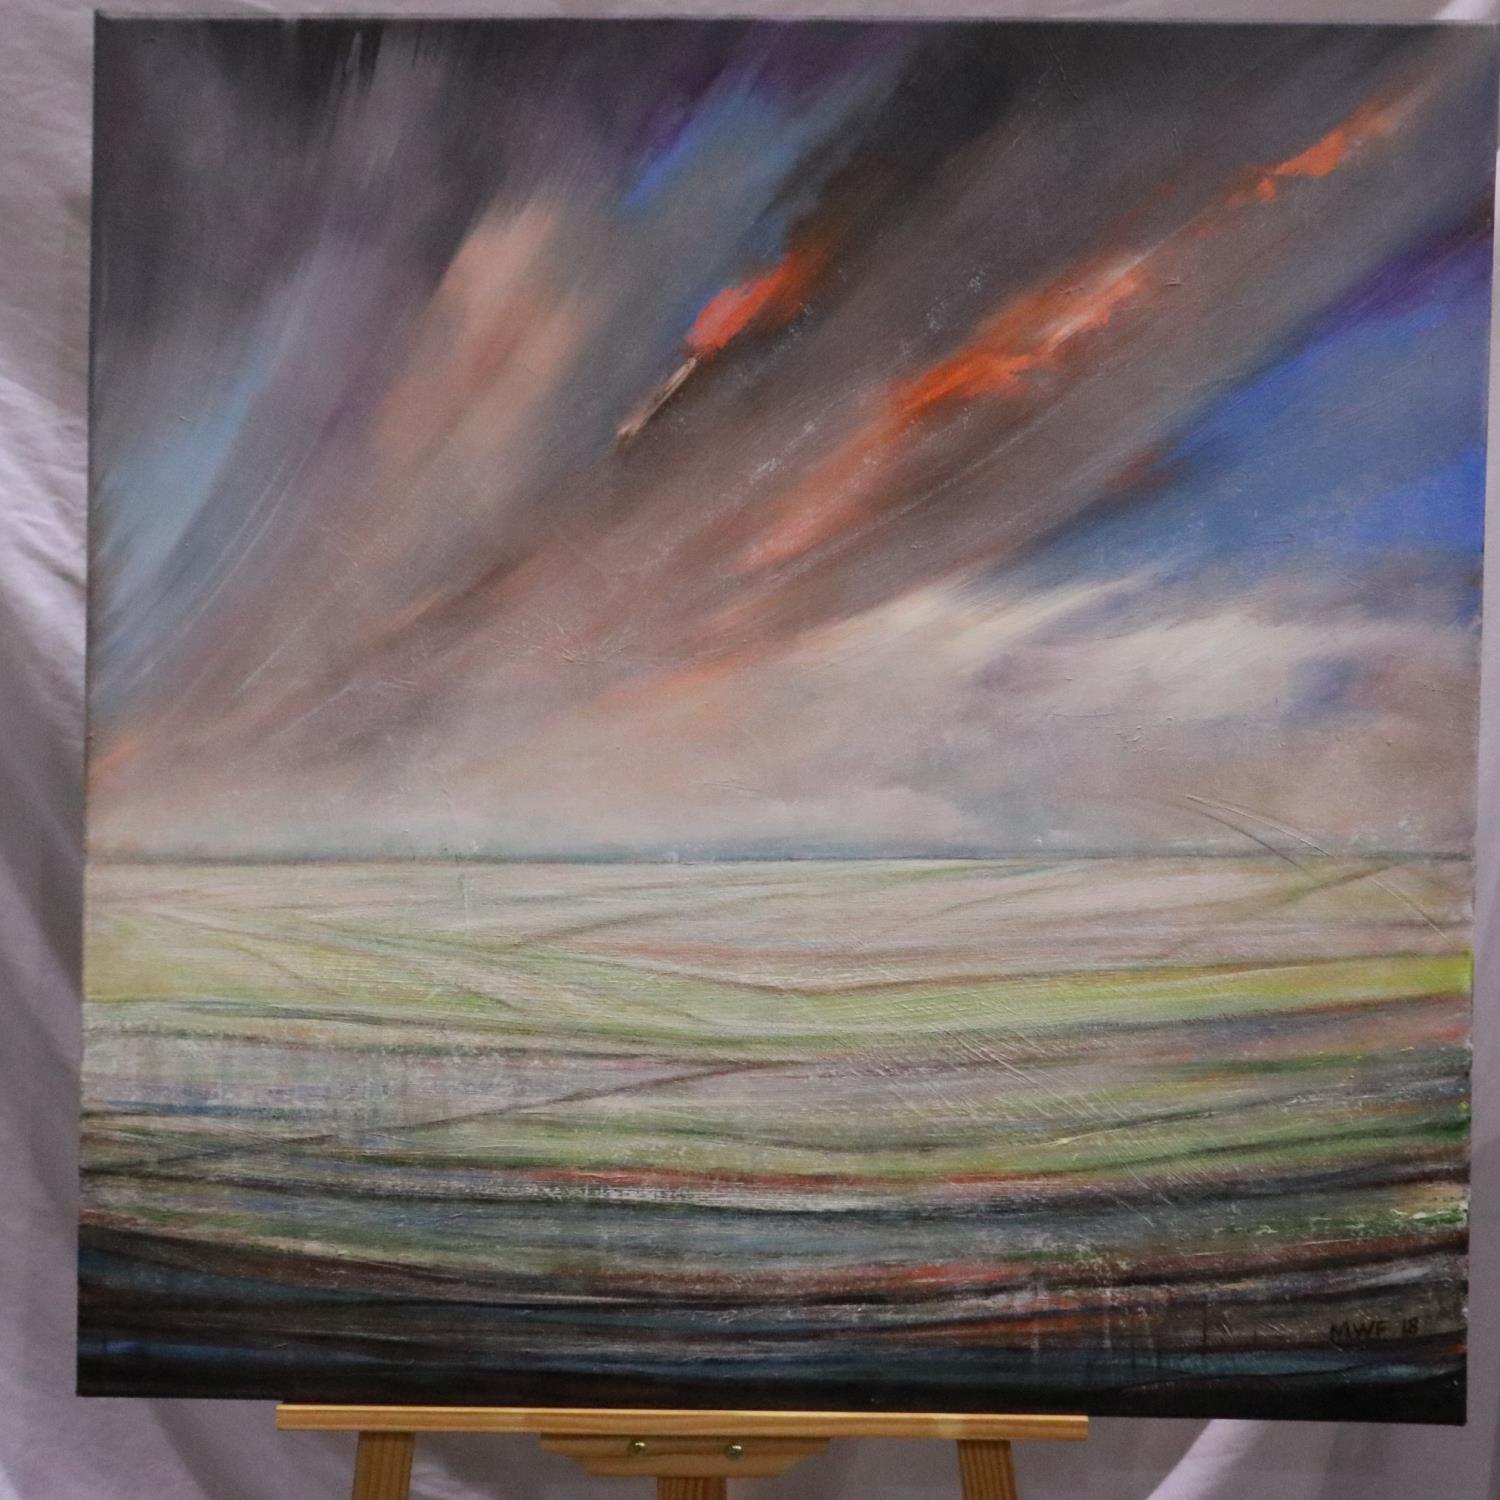 Michael Fargher (b. 1963): acrylic on canvas, Threatening Skies, 90 x 90 cm. Not available for in-